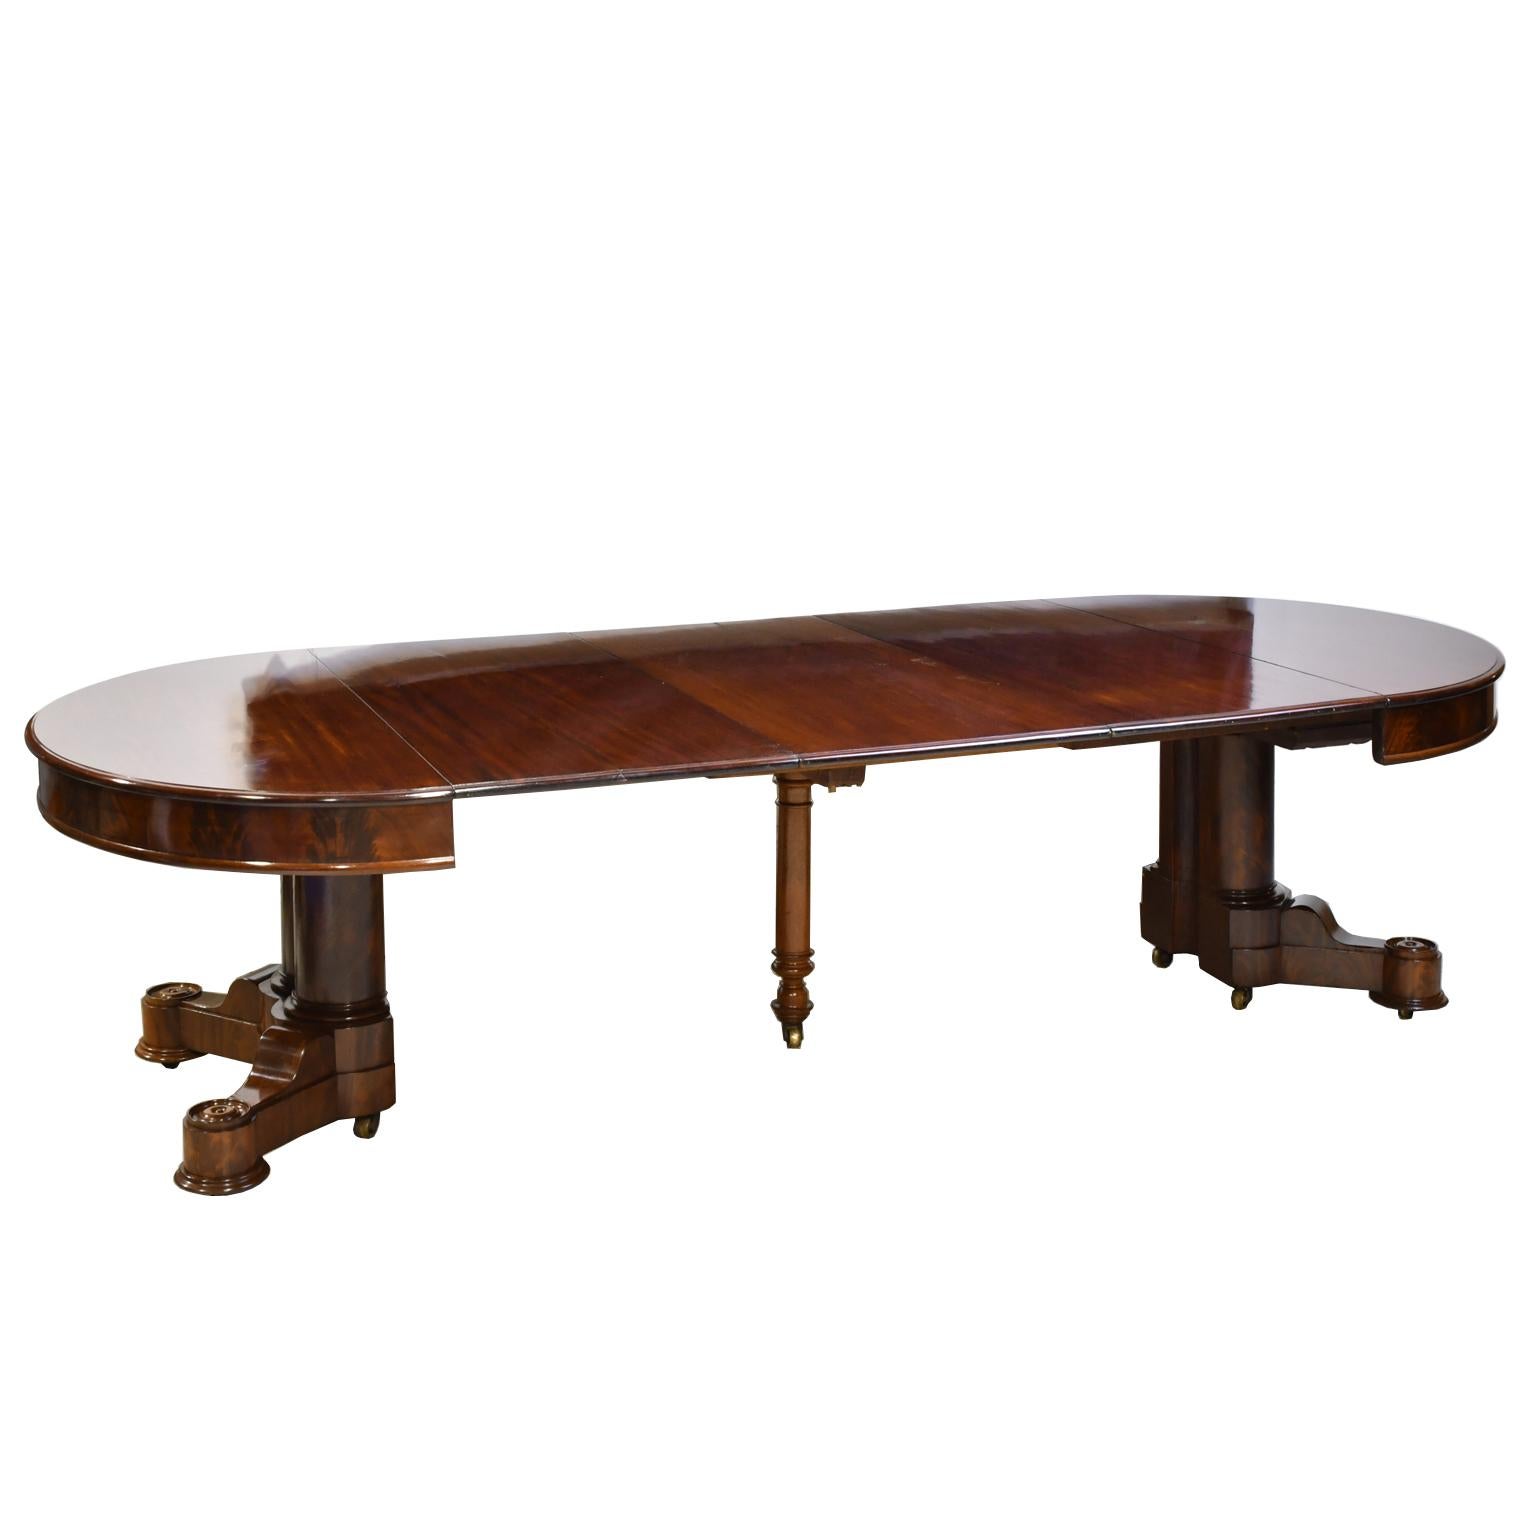 American Empire Oval Extension Dining Table in Mahogany with Pedestal Base 5